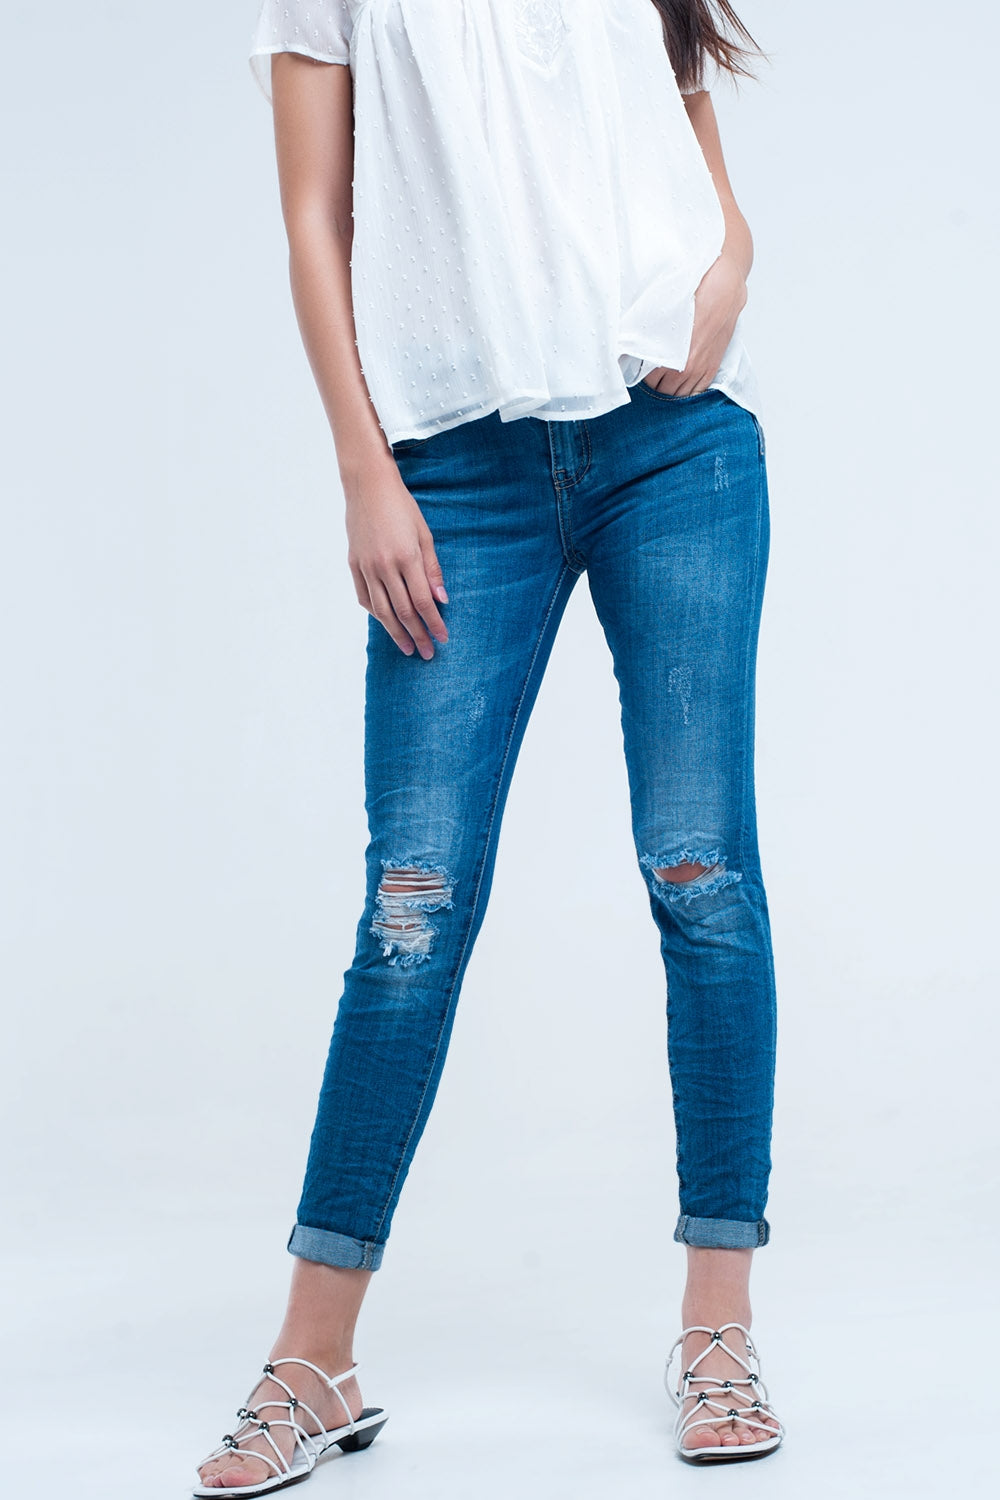 Q2 Skinny elastic jeans with rips